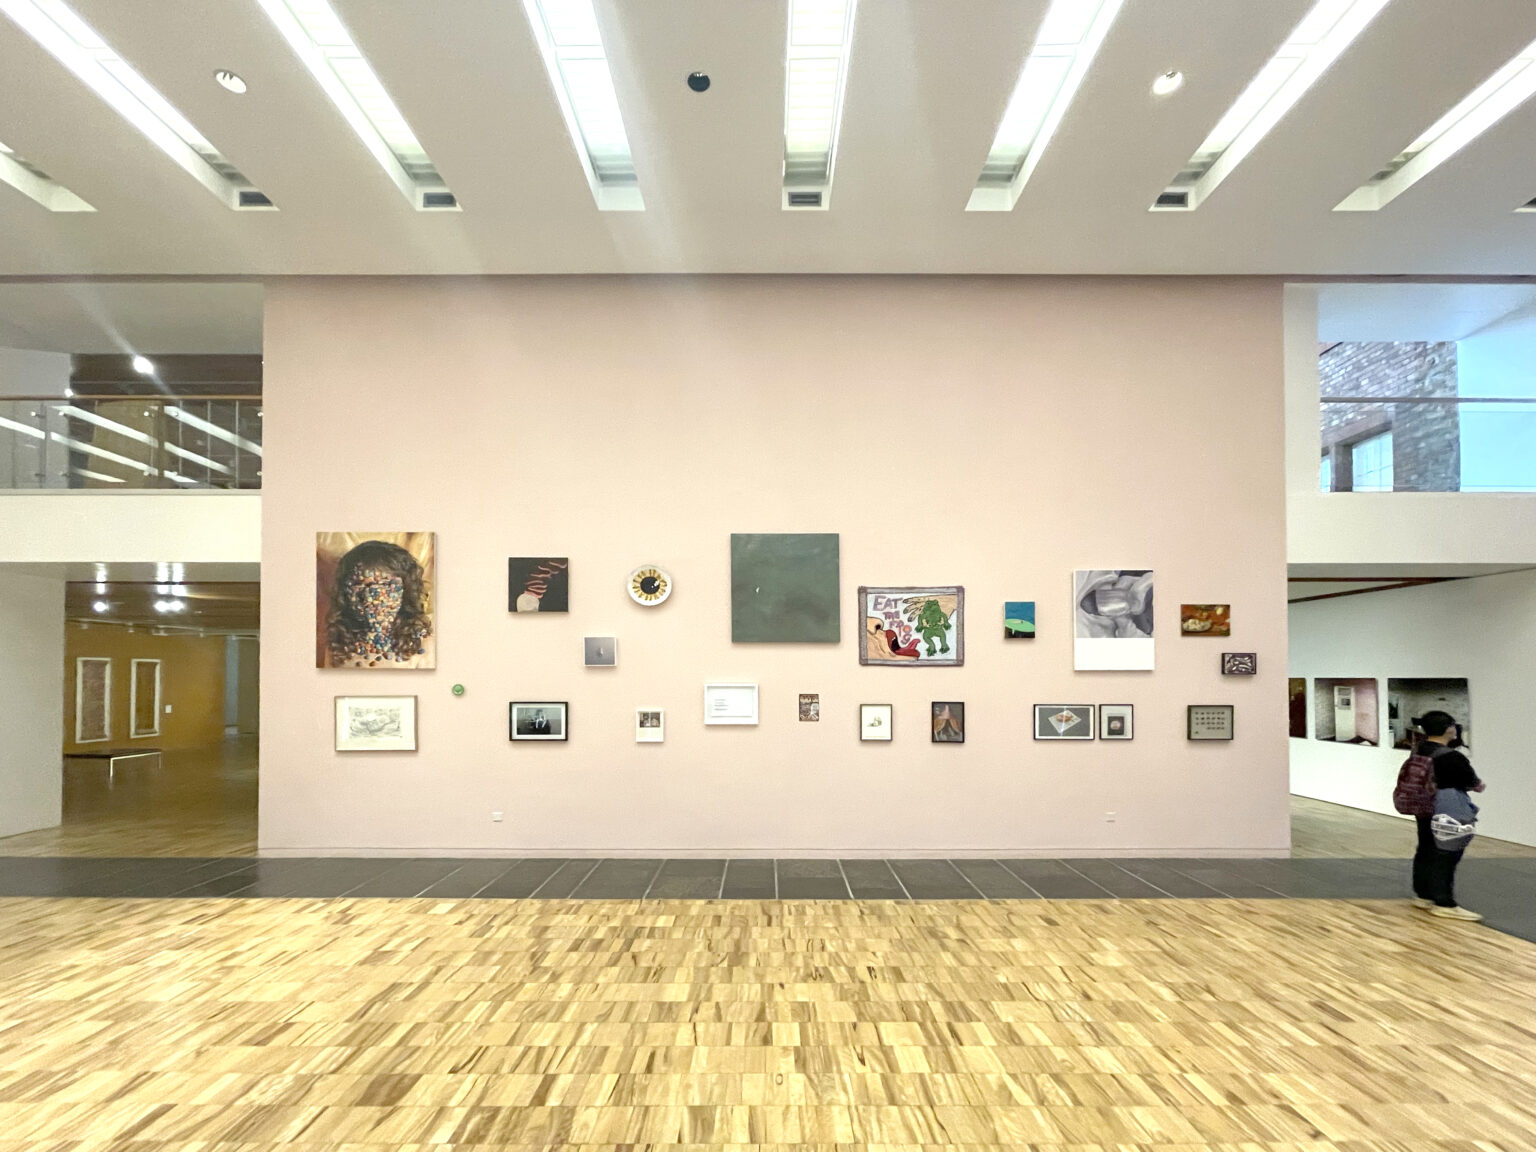 A series of works are shown in the centre of the image installed at different heights on a pastel pink wall.